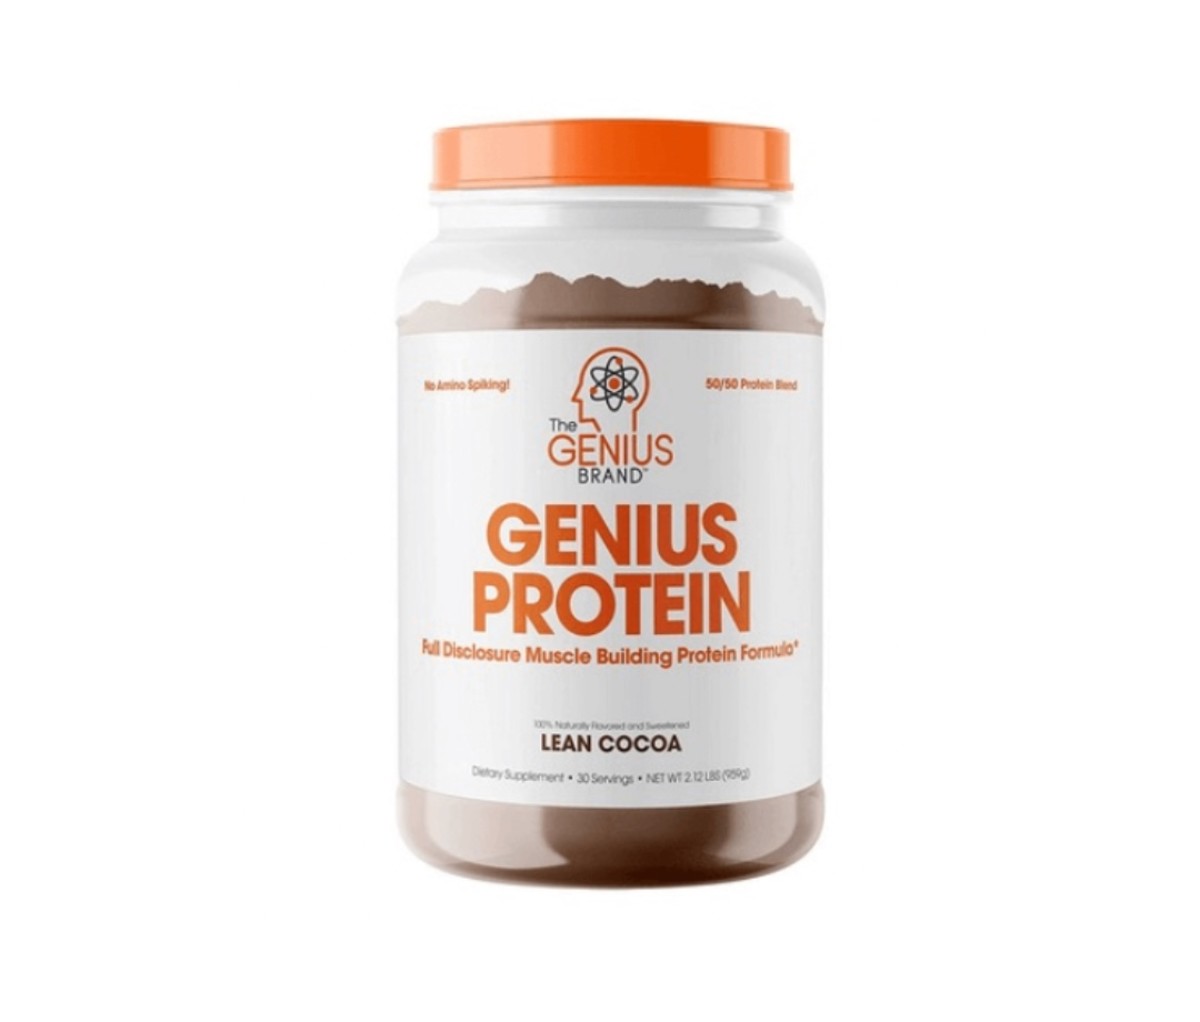 The best way to gain a lean, muscular physique is to train hard and take a protein supplement like these selected based on important criteria like nutrition, flavor and value for money.